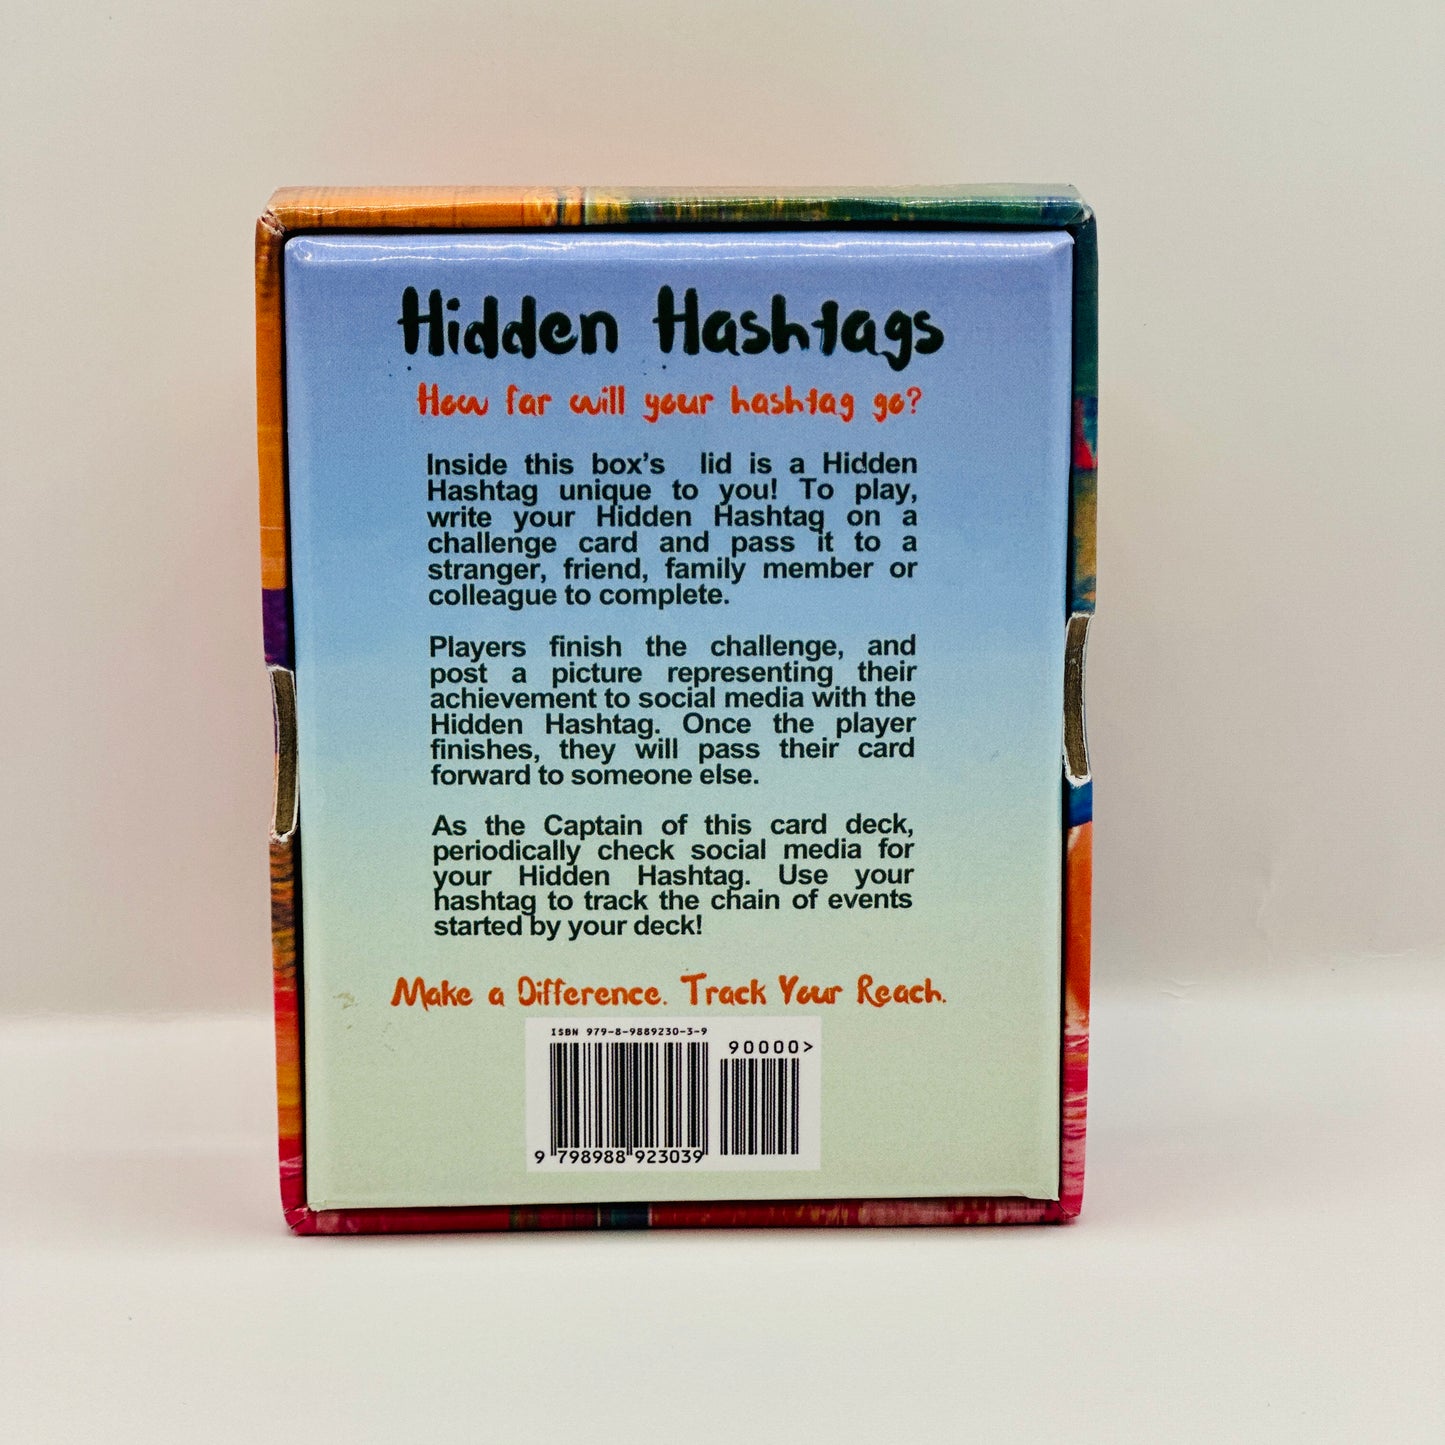 Hidden Hashtags: Random Acts of Kindness Edition - Spread it. Give it. Track it. A Motivational Challenge Card Game that spreads overtime!